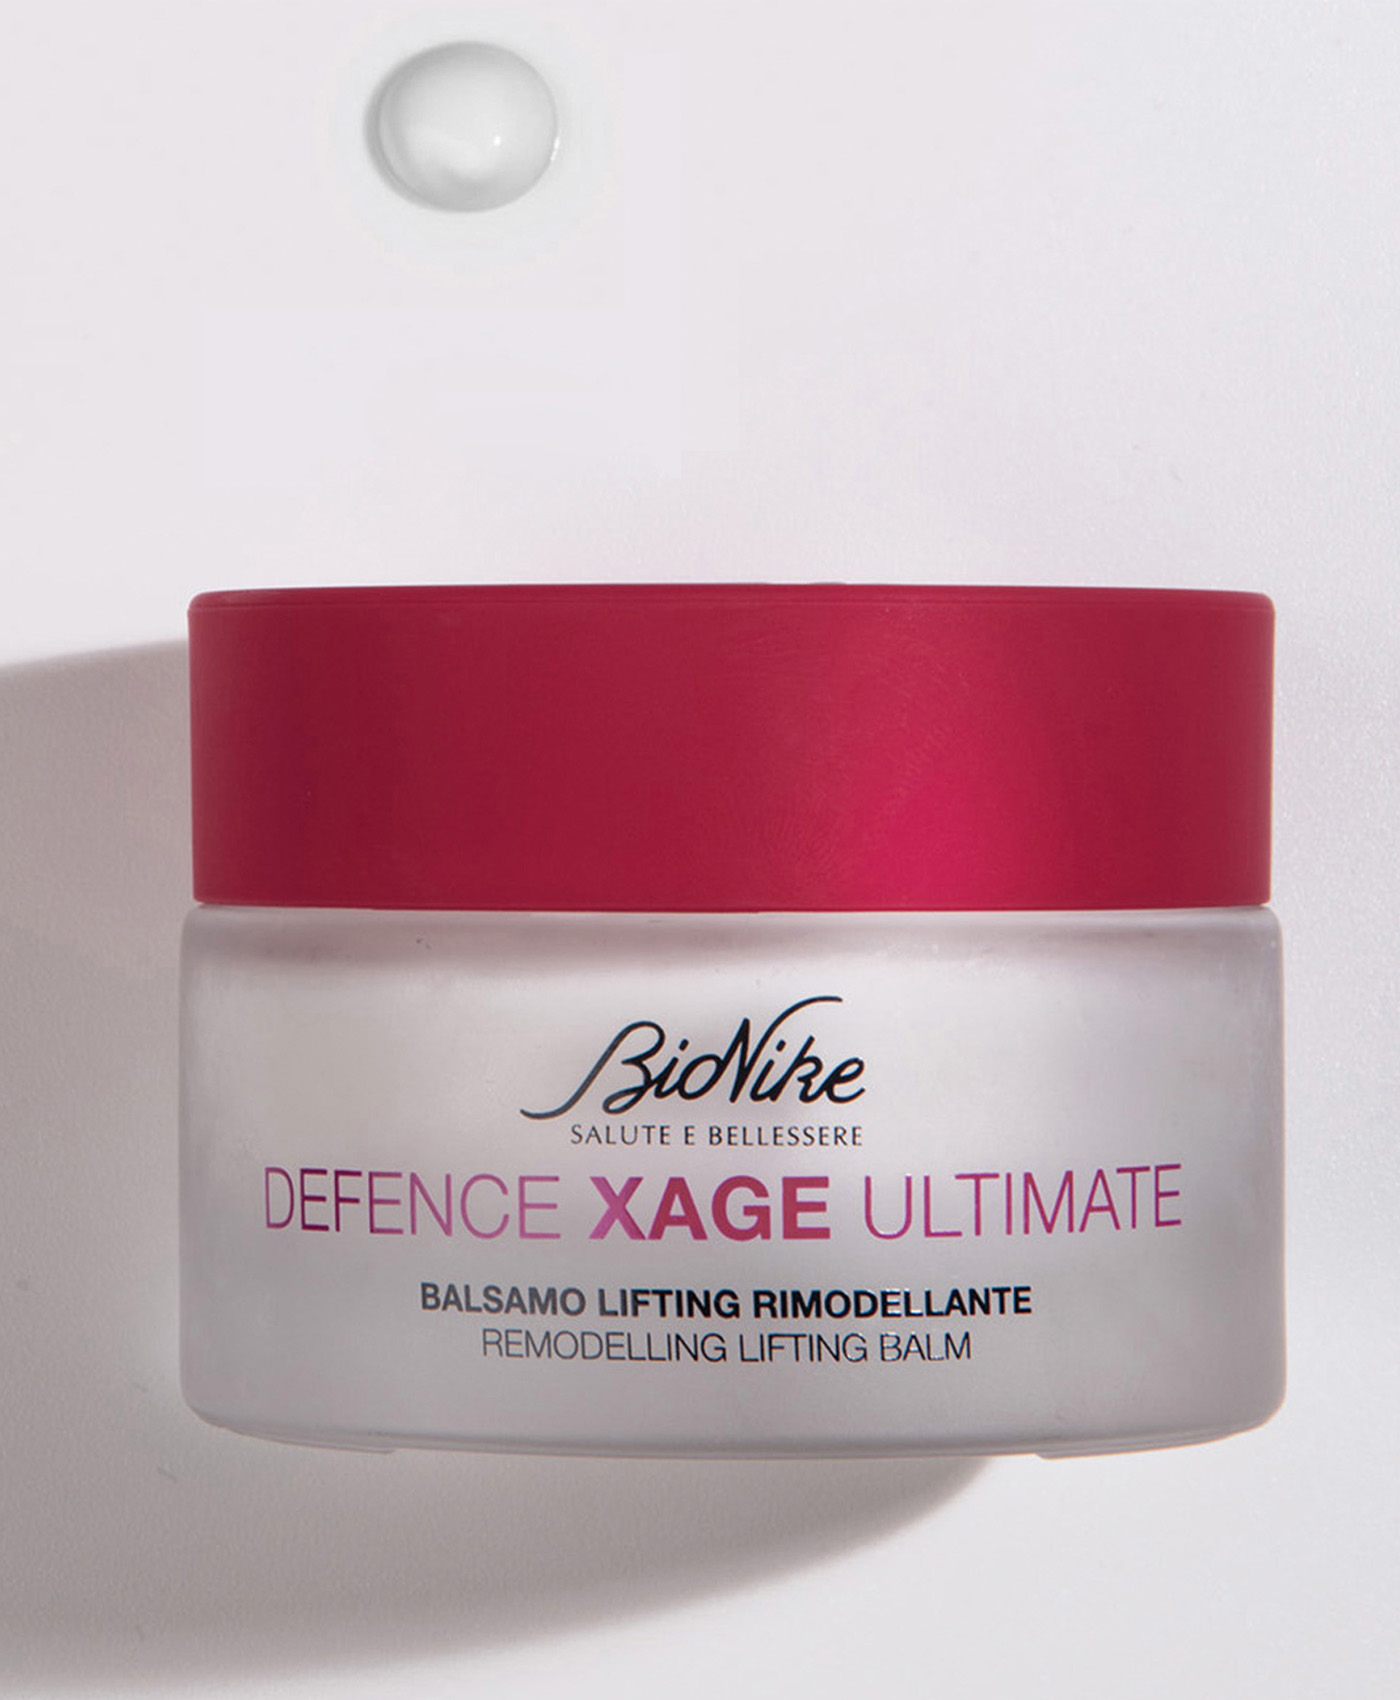 Remodelling Lifting Balm Ultimate - BioNike - Sito Ufficiale